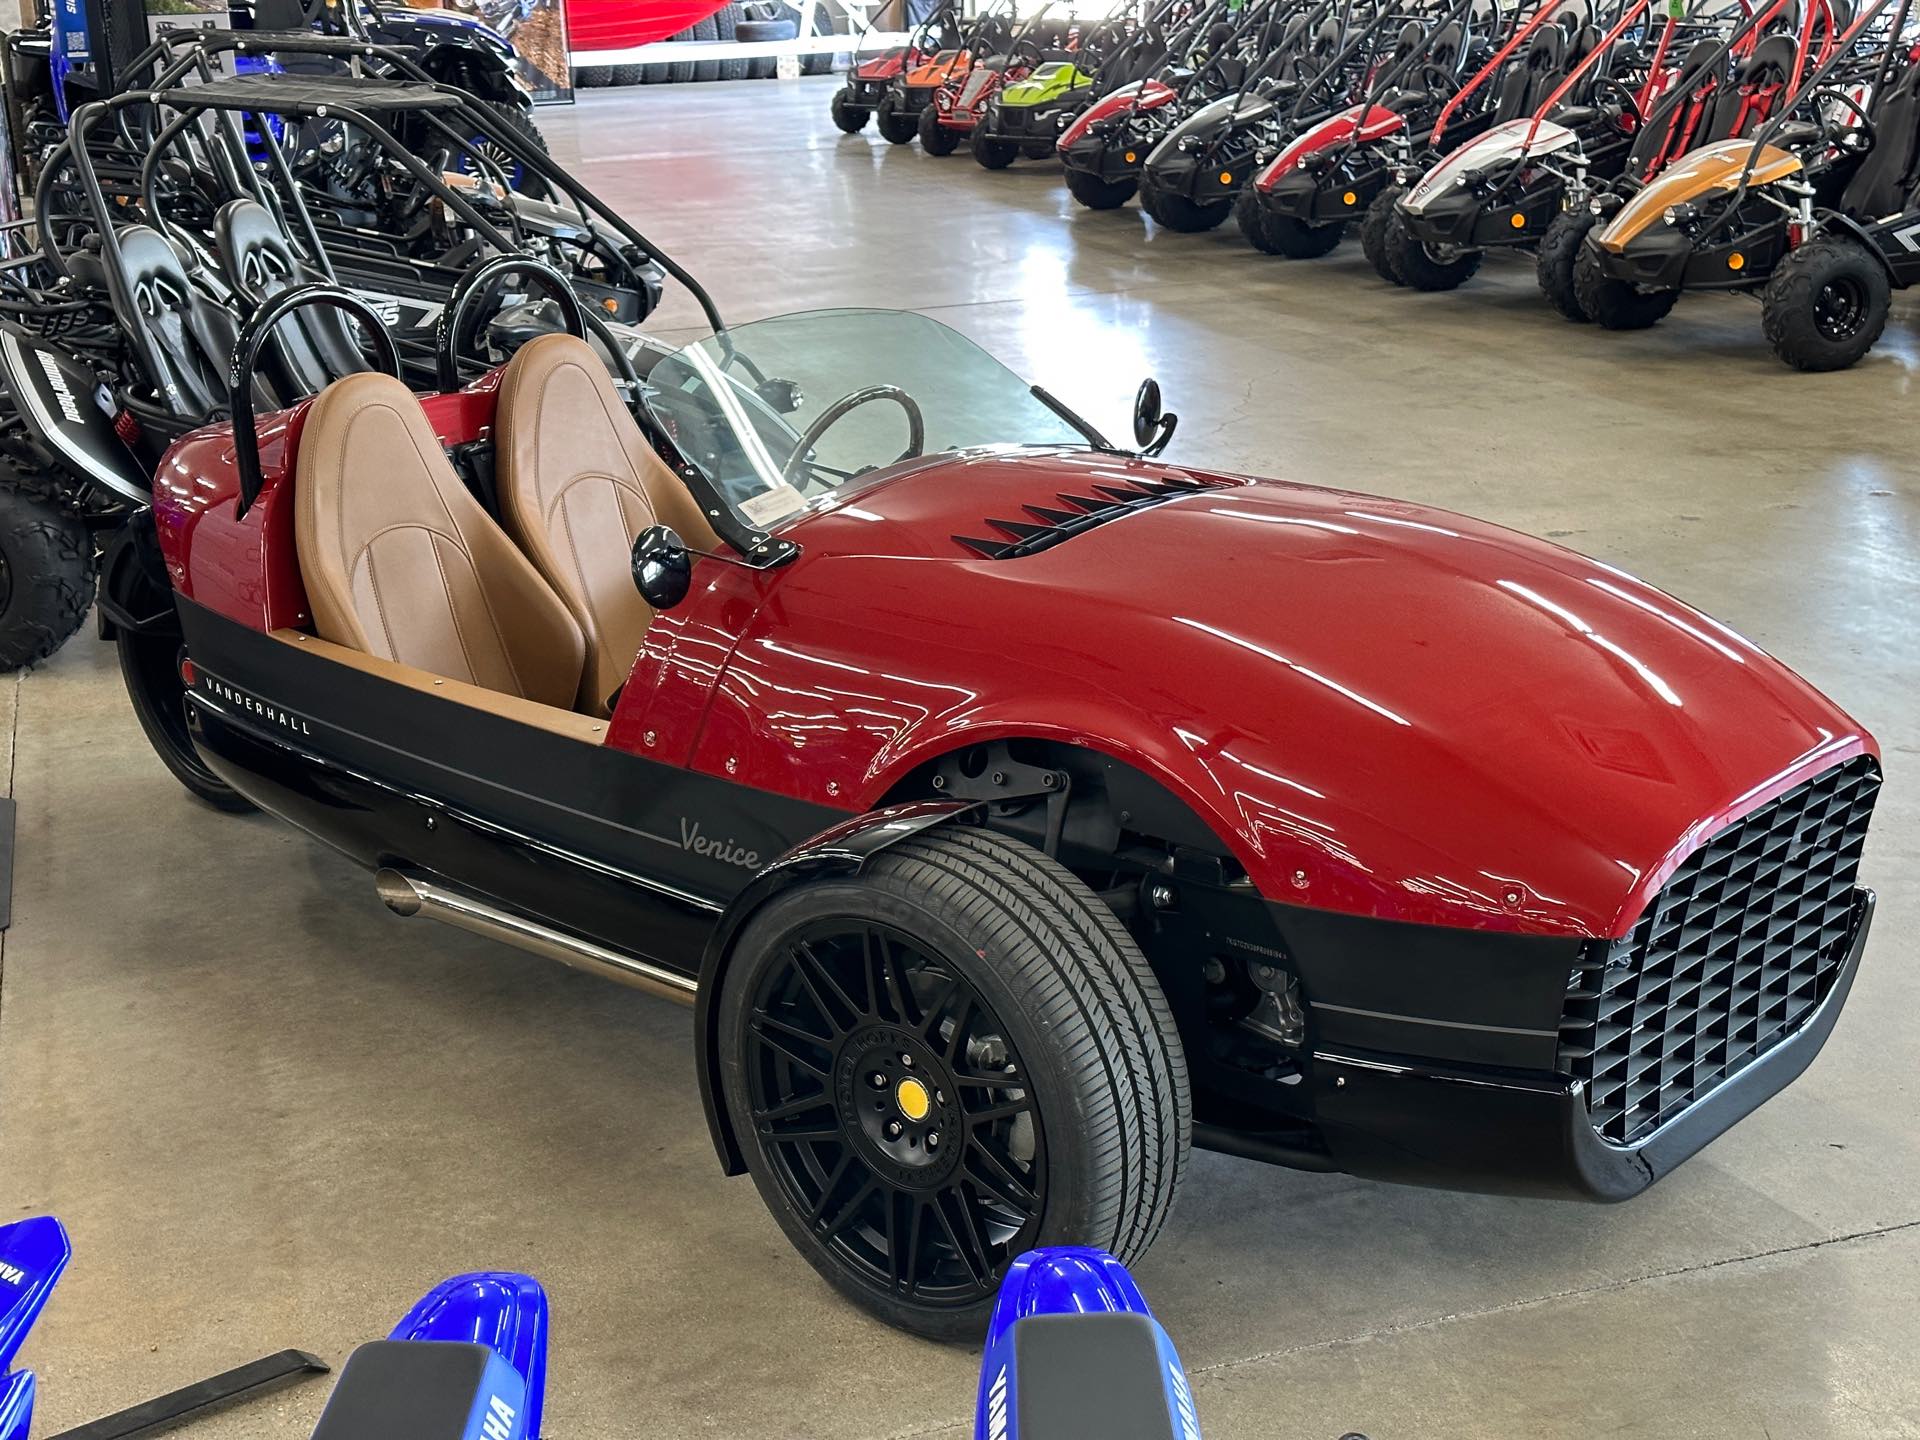 2023 Vanderhall Venice GT Venice GT at ATVs and More